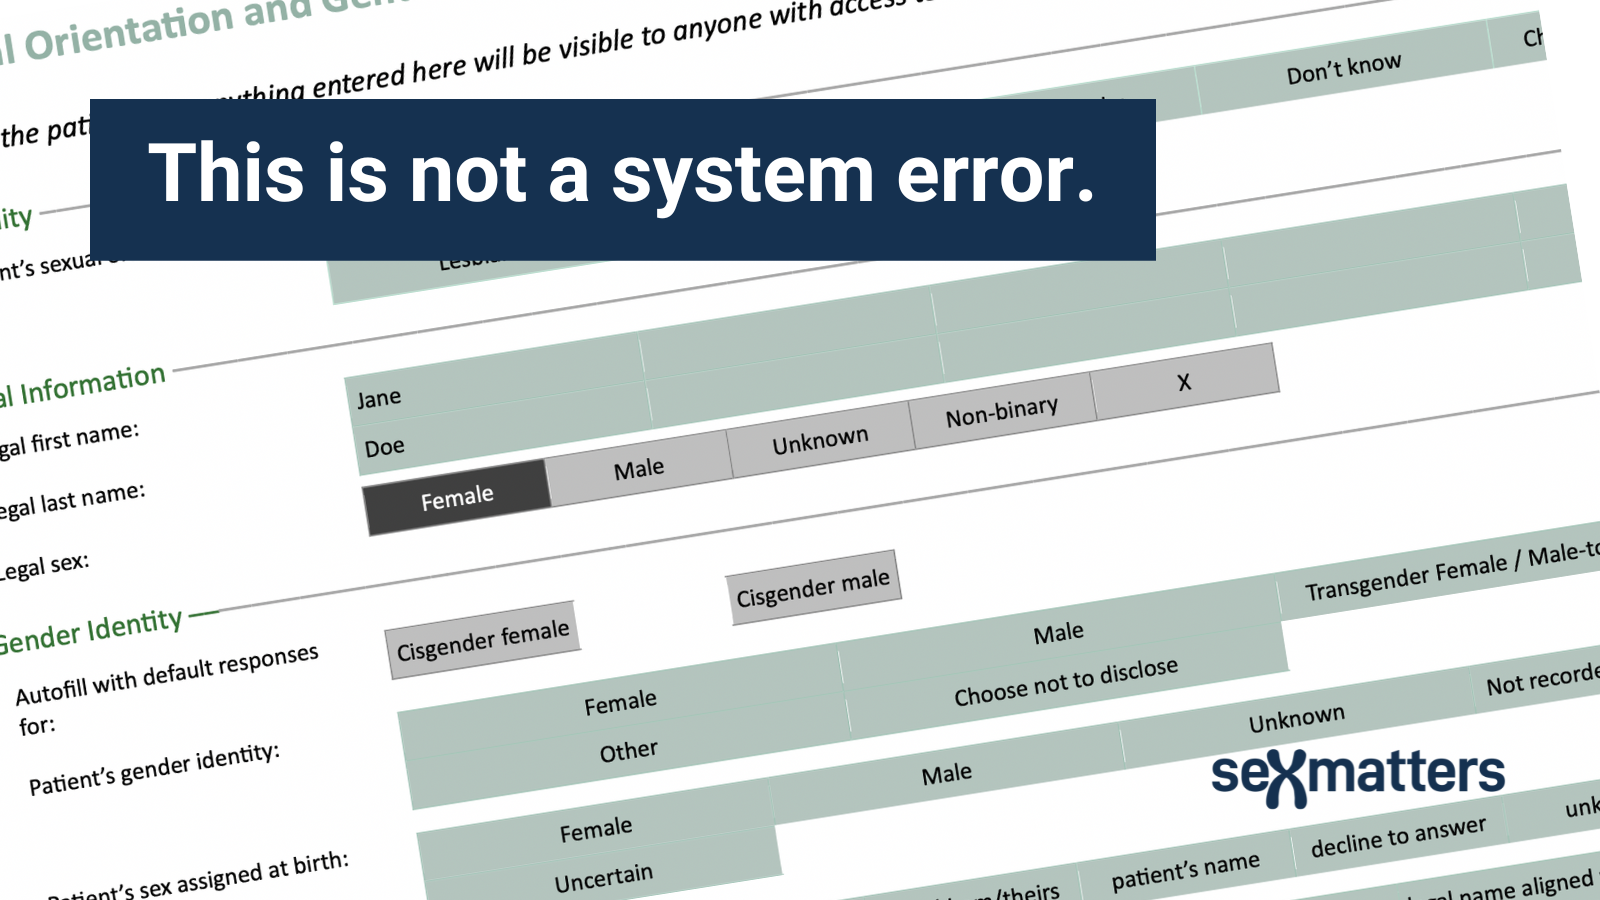 This is not a system error